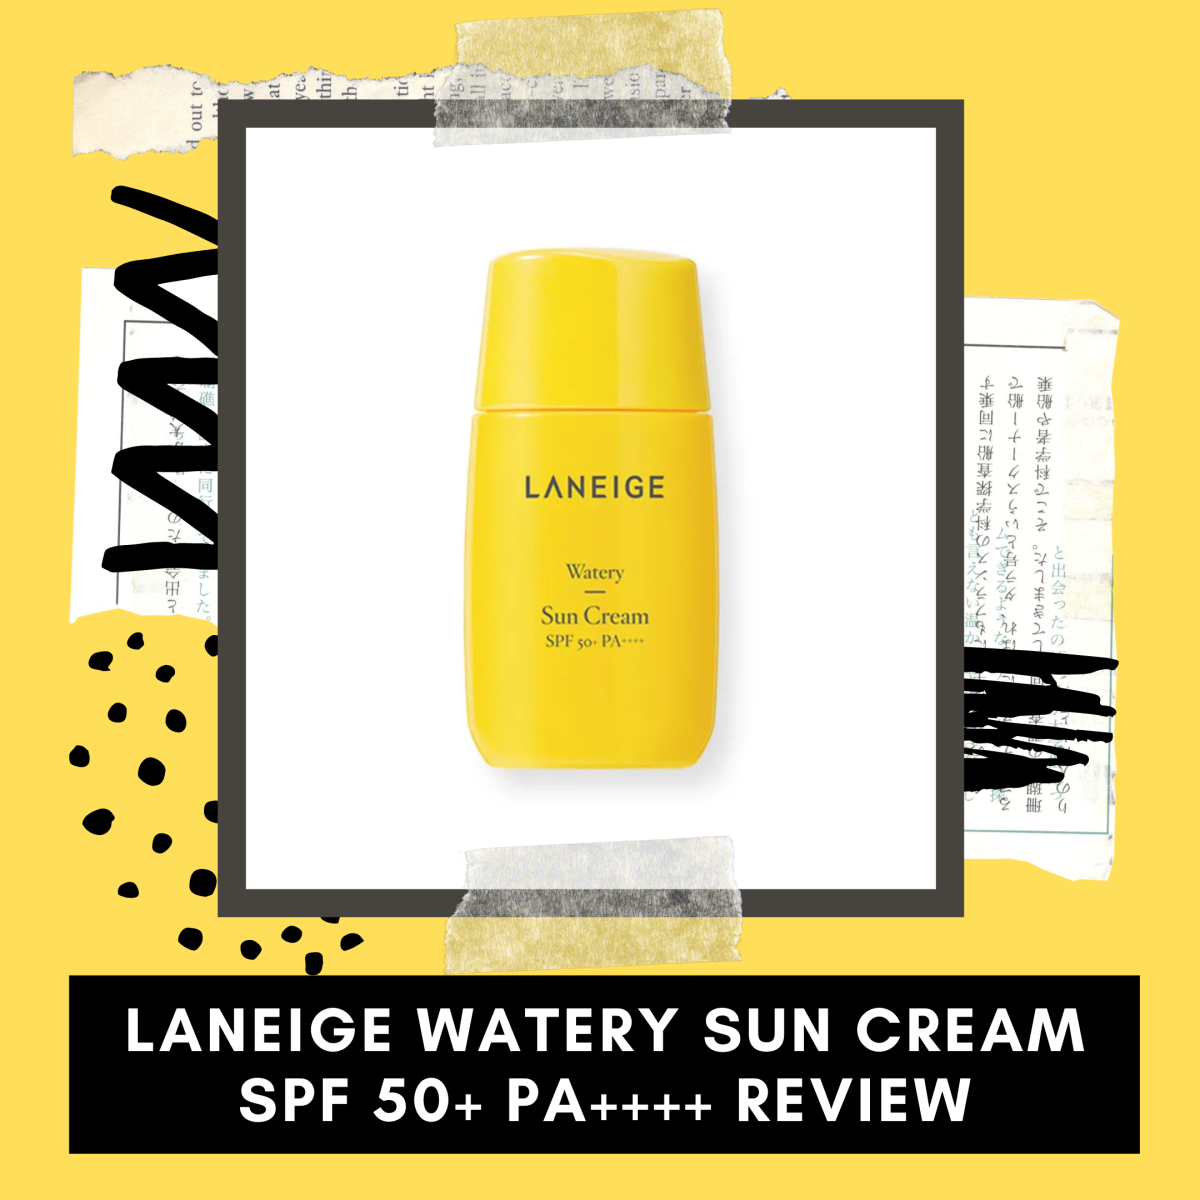 Laneige Watery Sun Cream SPF 50+ PA++++ Review